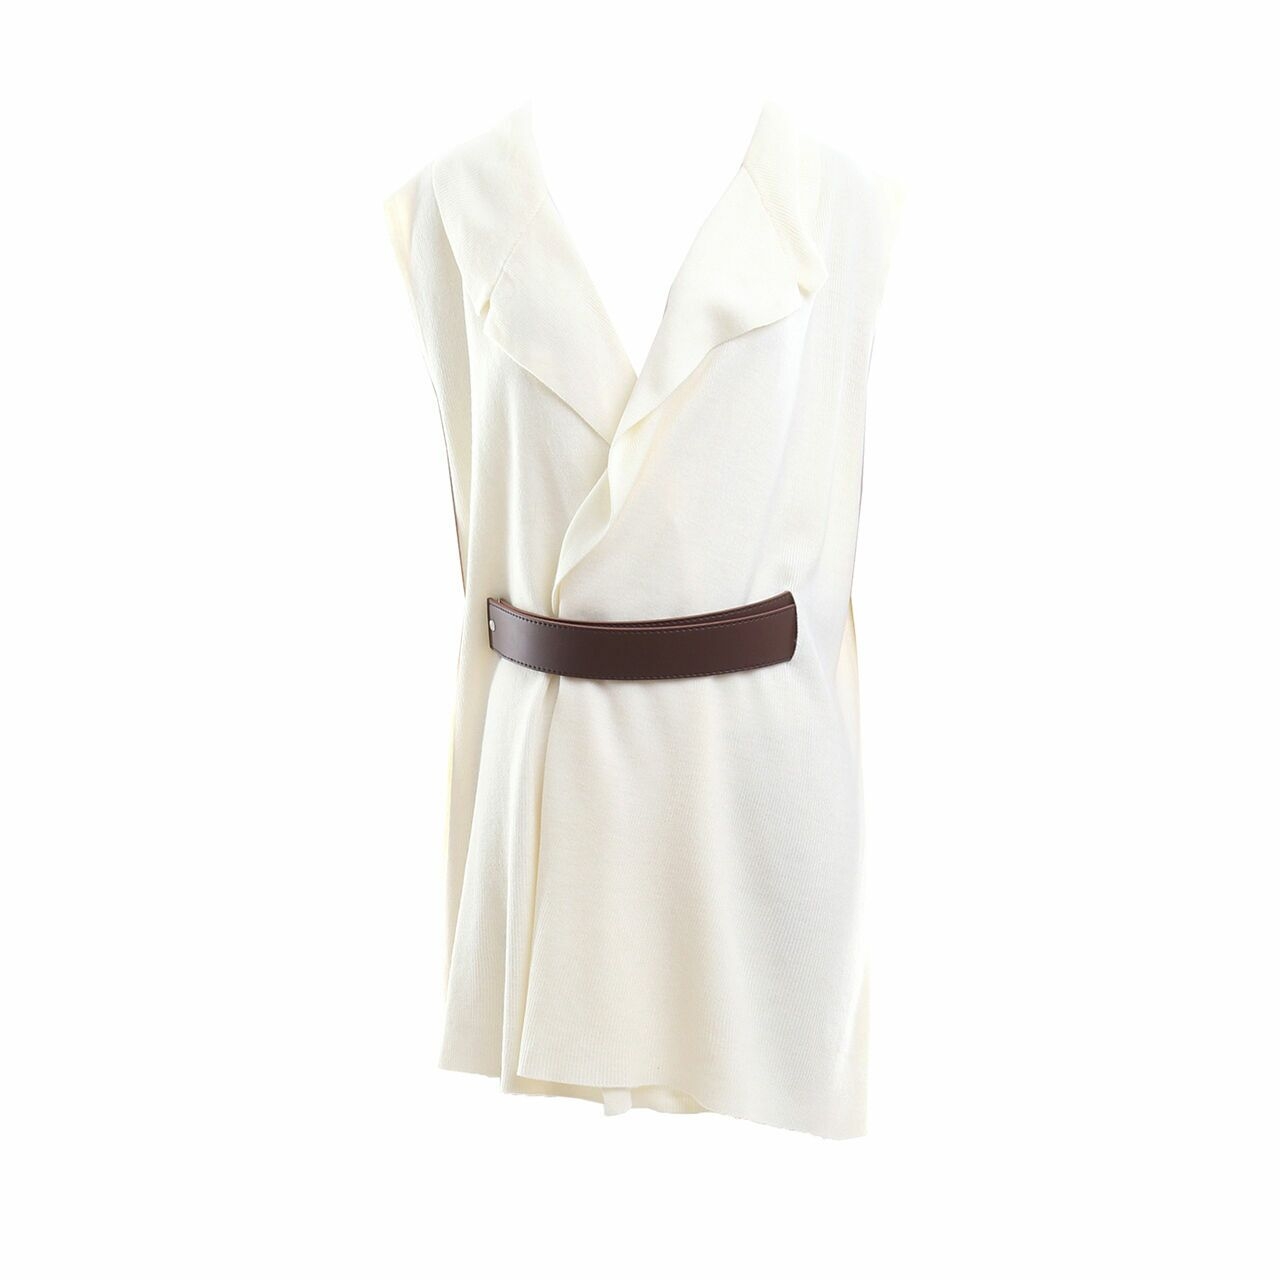 Clay by duma Cream With Belt Vest